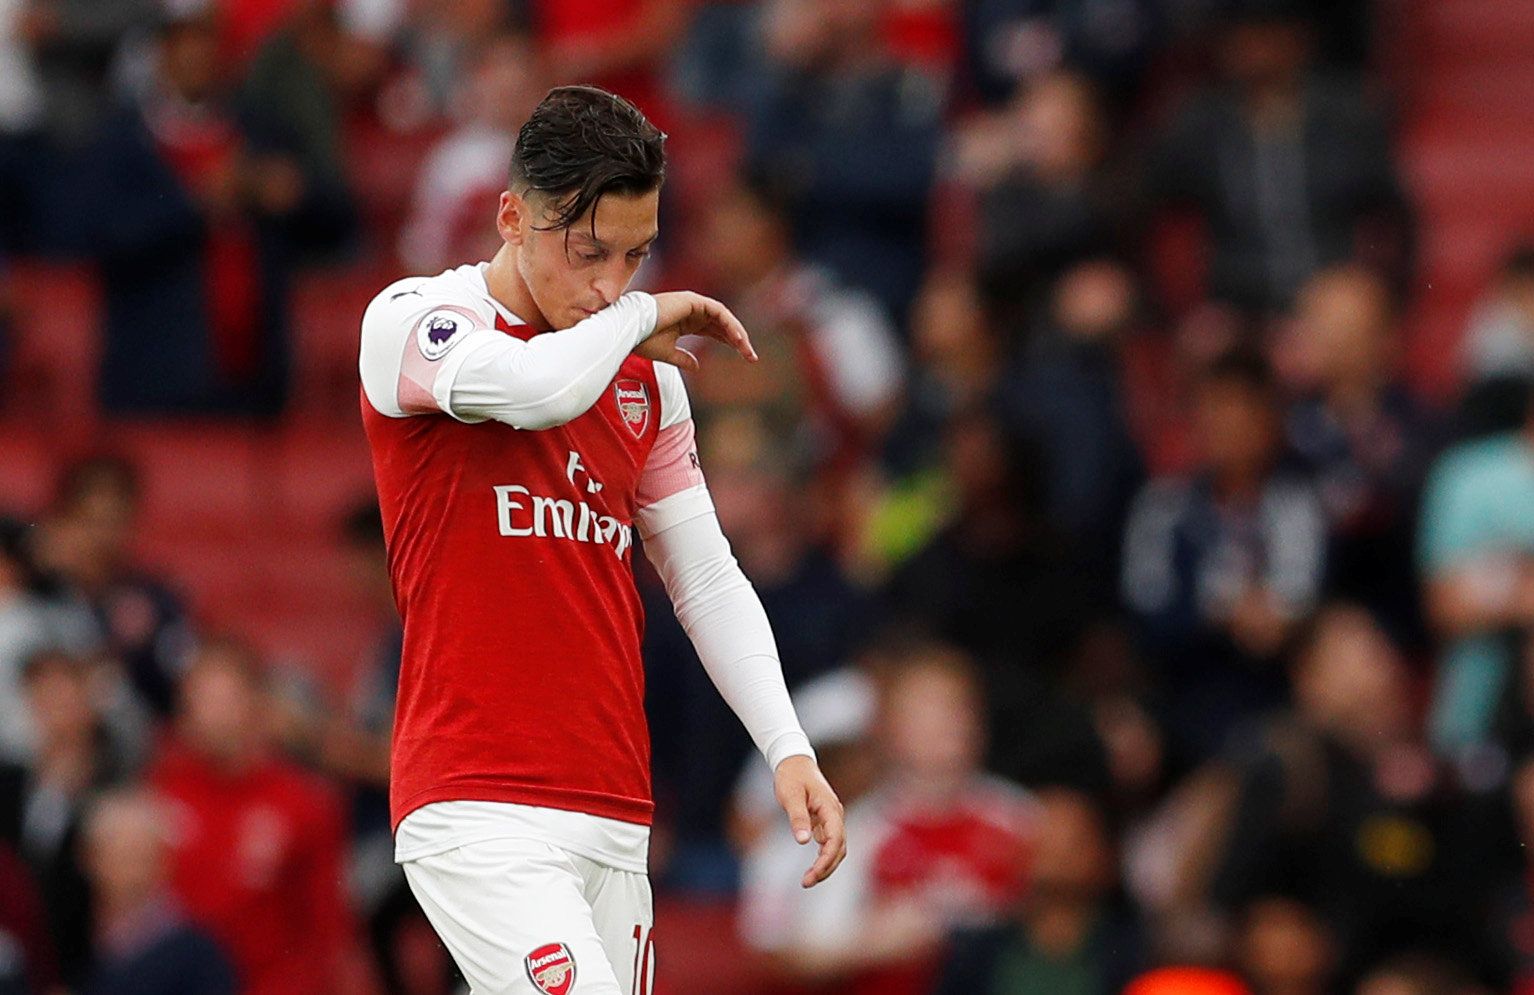 Soccer Football - Premier League - Arsenal v Manchester City - Emirates Stadium, London, Britain - August 12, 2018   Arsenal's Mesut Ozil after the match   Action Images via Reuters/John Sibley    EDITORIAL USE ONLY. No use with unauthorized audio, video, data, fixture lists, club/league logos or 